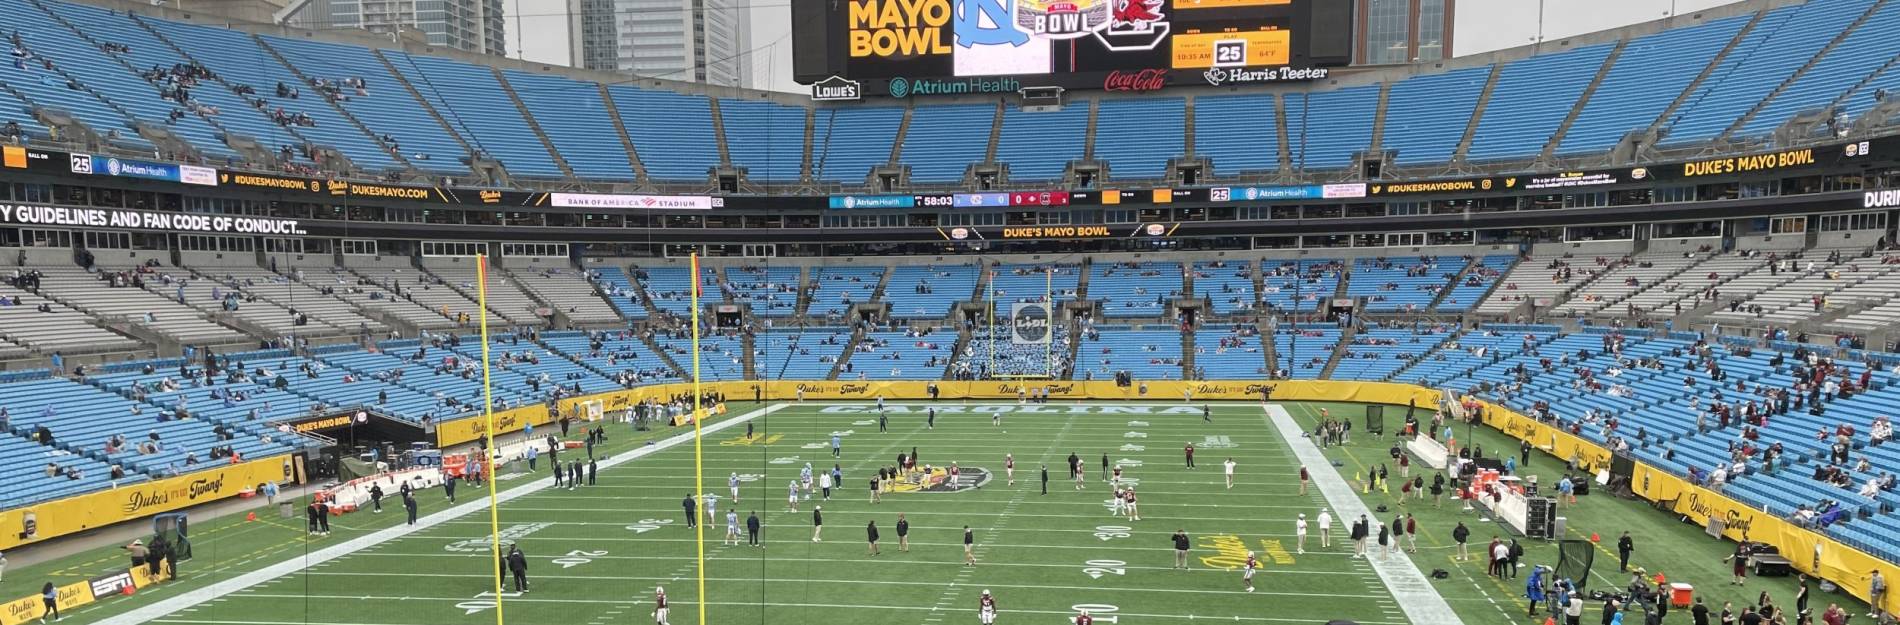 Bank Of America Stadium Is Located In Charlotte North Carol V2 9127 